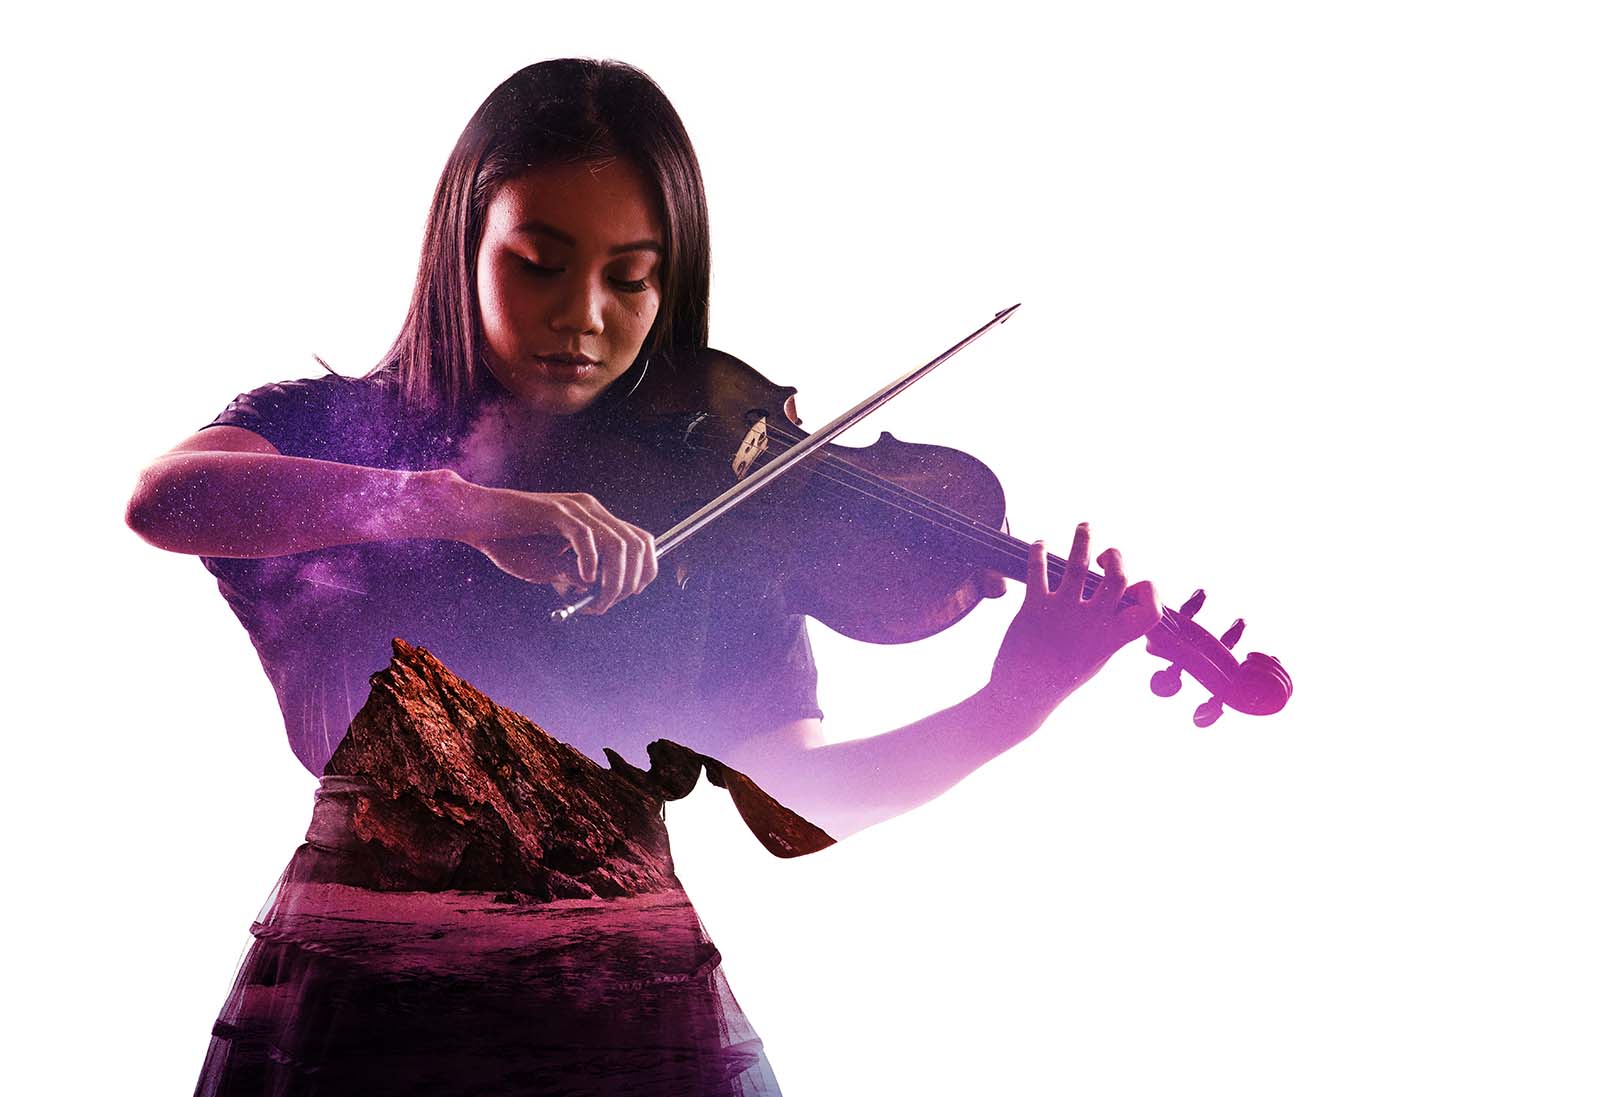 silhouette of a lady playing violin on  a white background. The silhouette of her body is a picture  of a rocky planet with the starts seen above. 